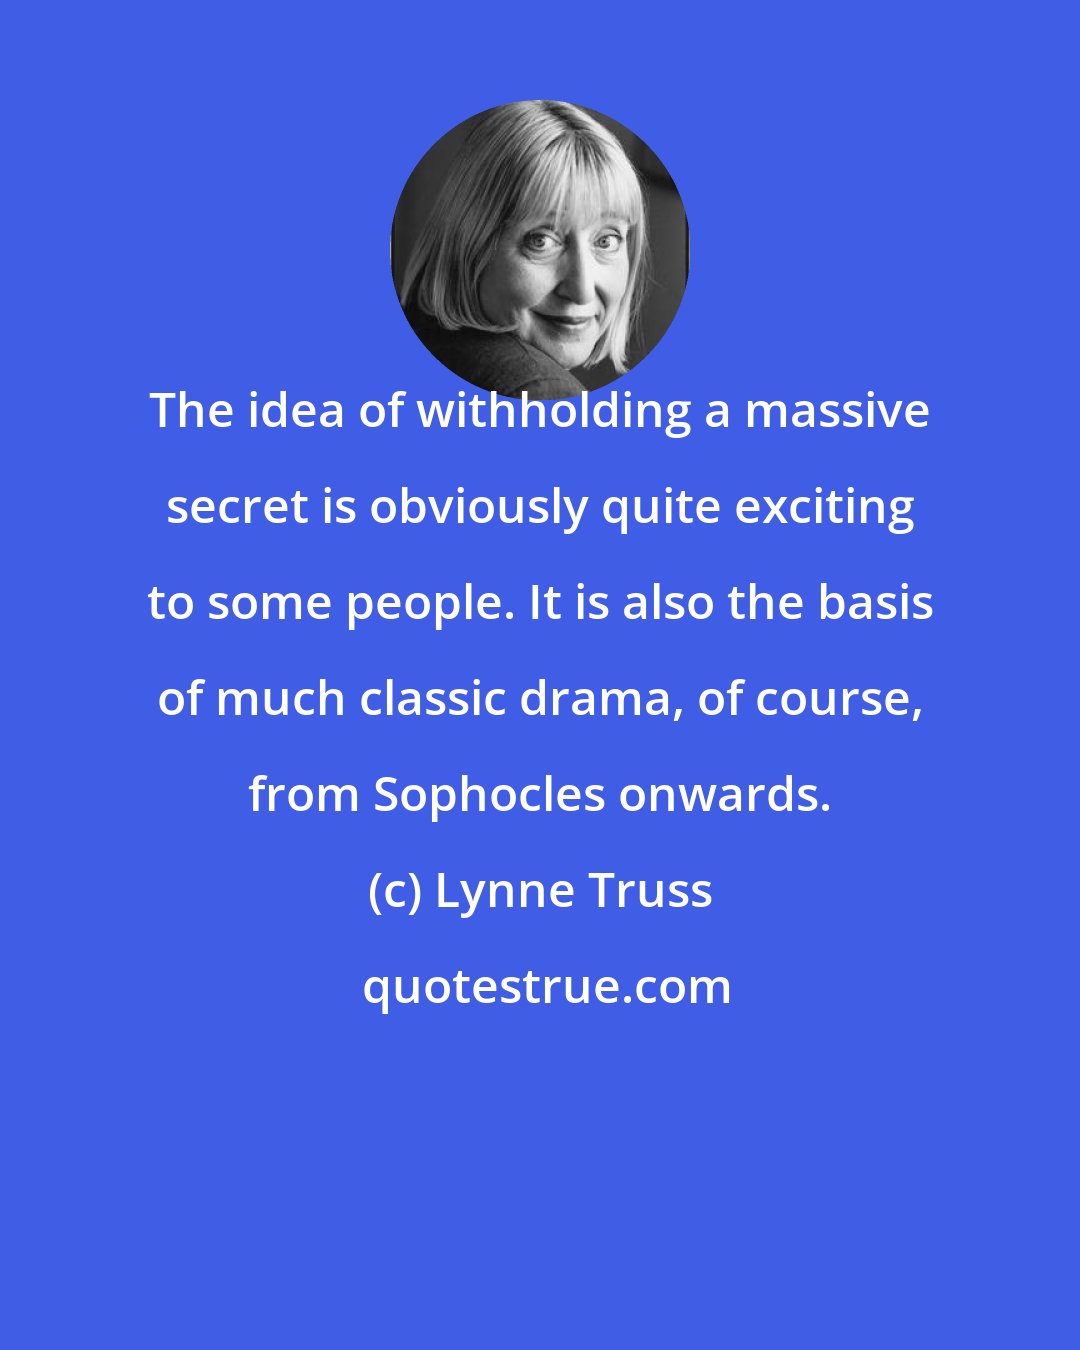 Lynne Truss: The idea of withholding a massive secret is obviously quite exciting to some people. It is also the basis of much classic drama, of course, from Sophocles onwards.